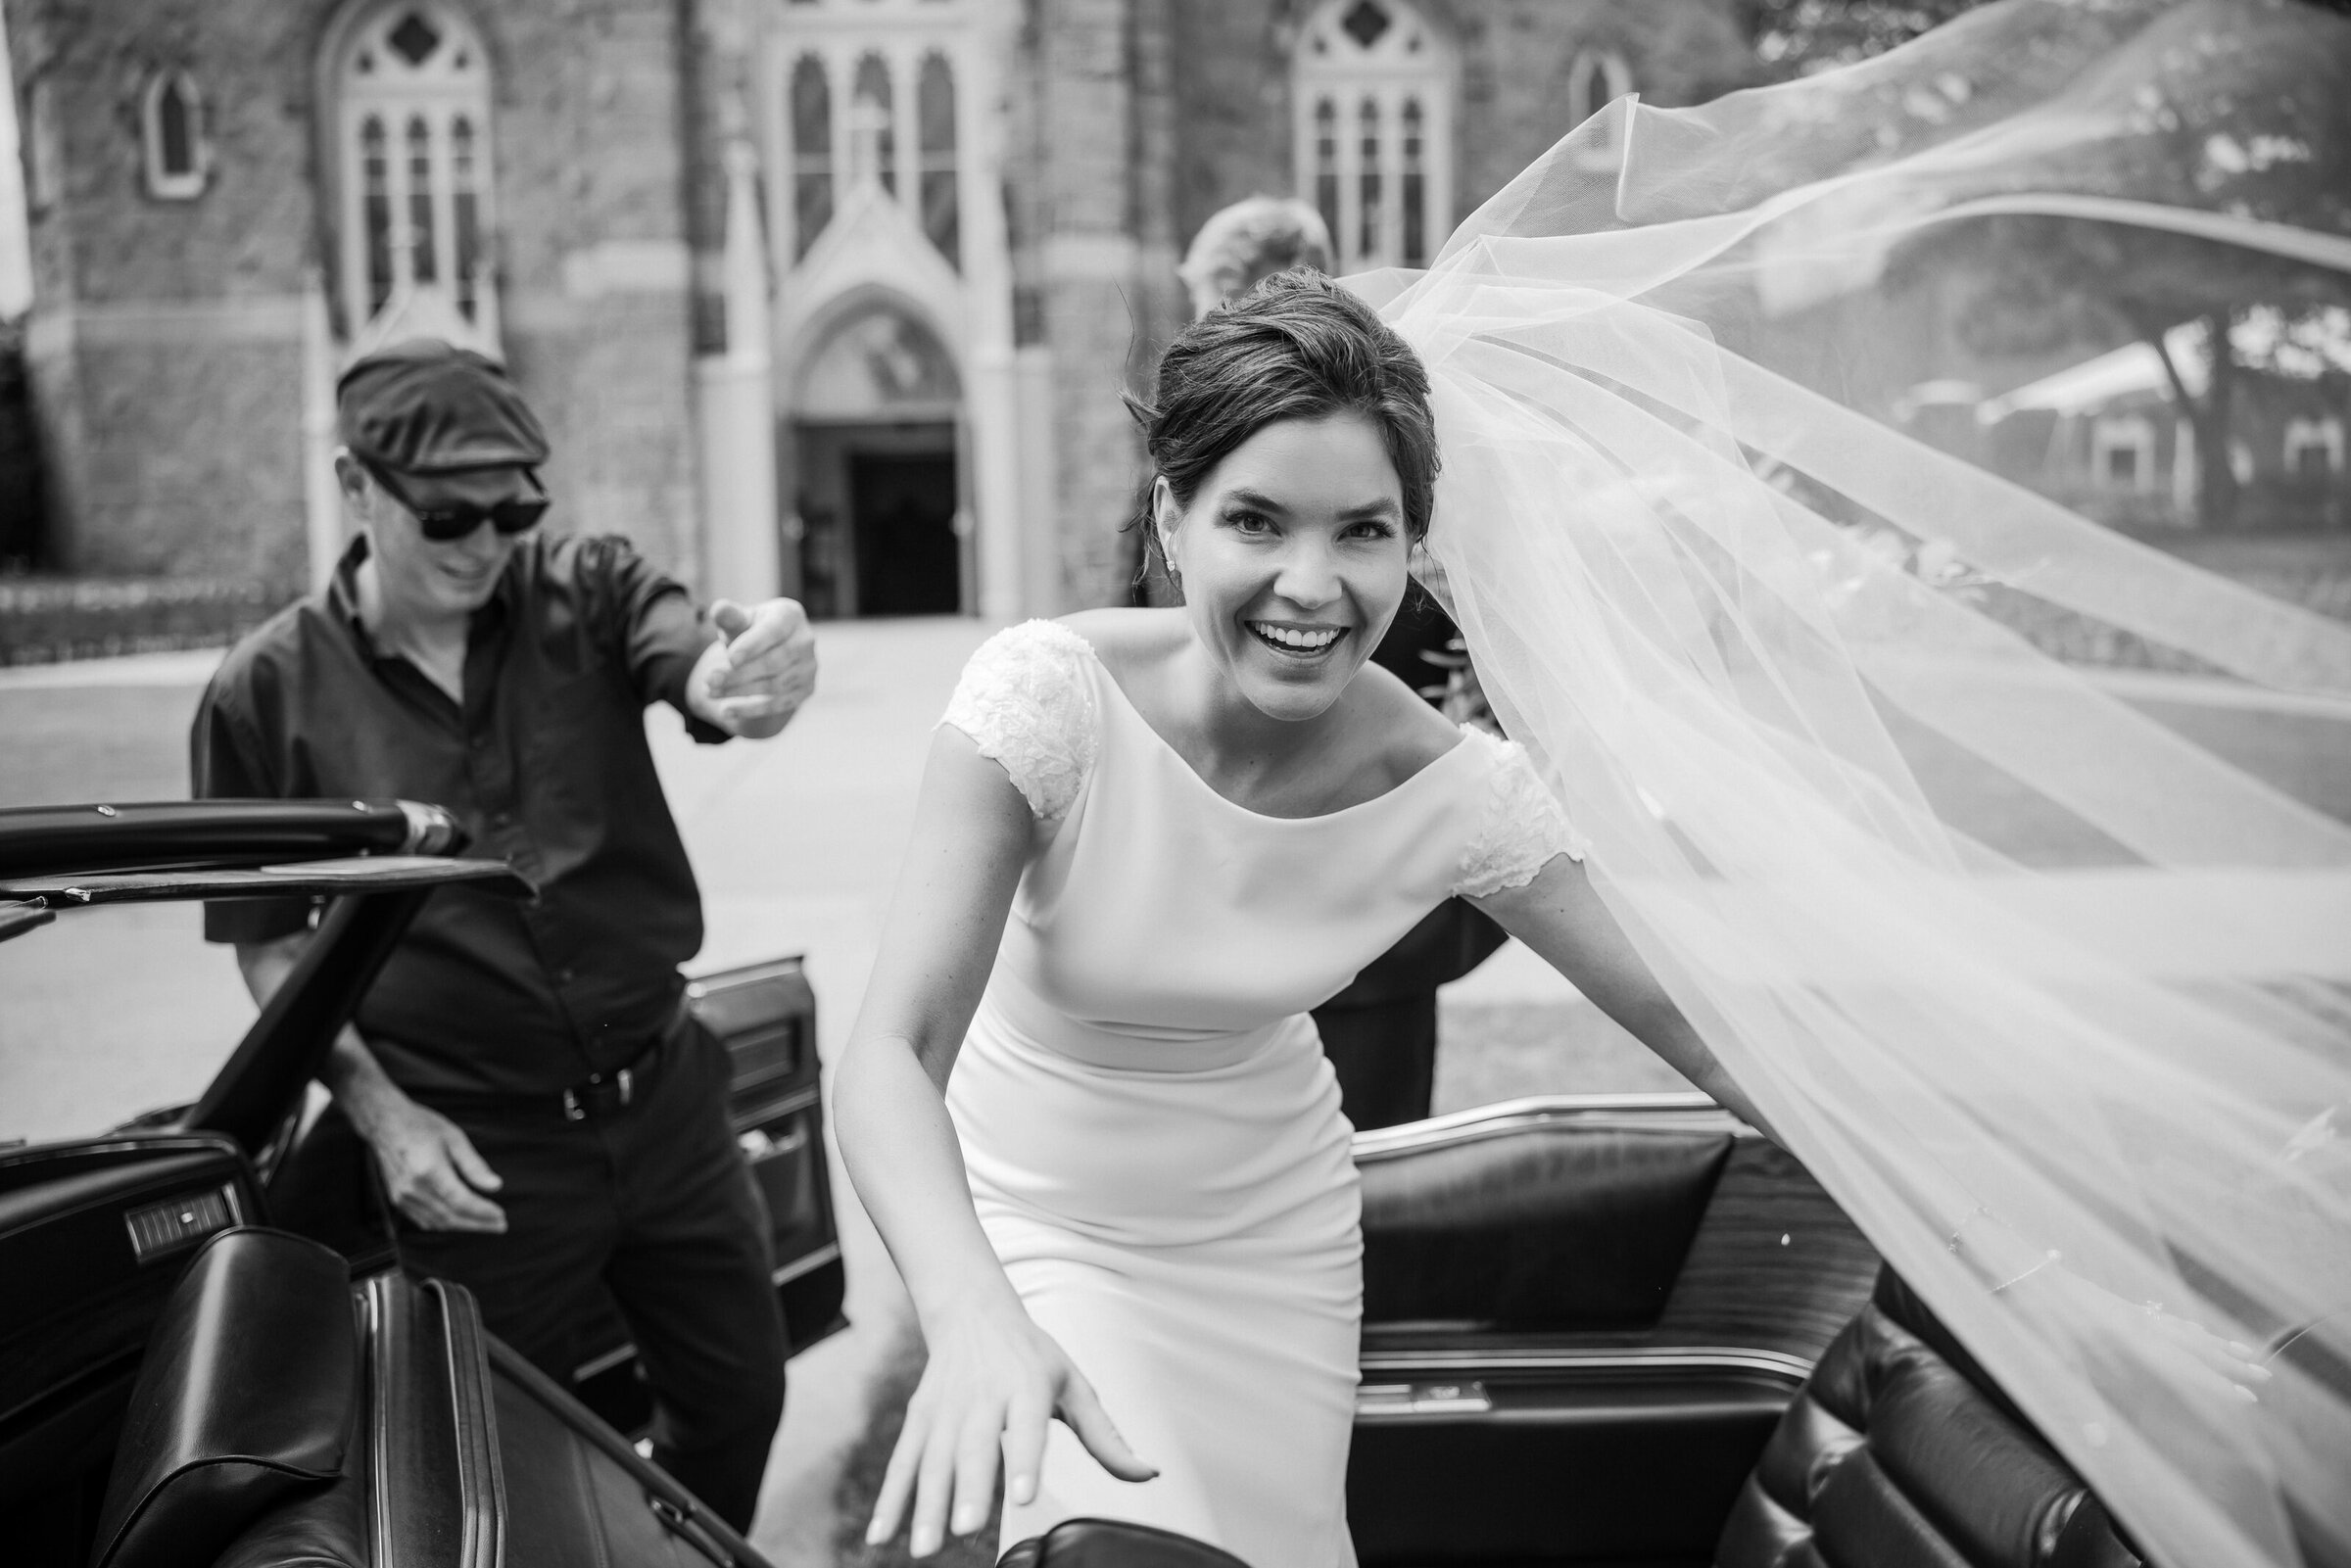 A candid moment of the bride getting into the vintage cabriolet with the veil flowing after her wedding ceremony at Cathedral Basilica of Sacred Heart in New Jersey.